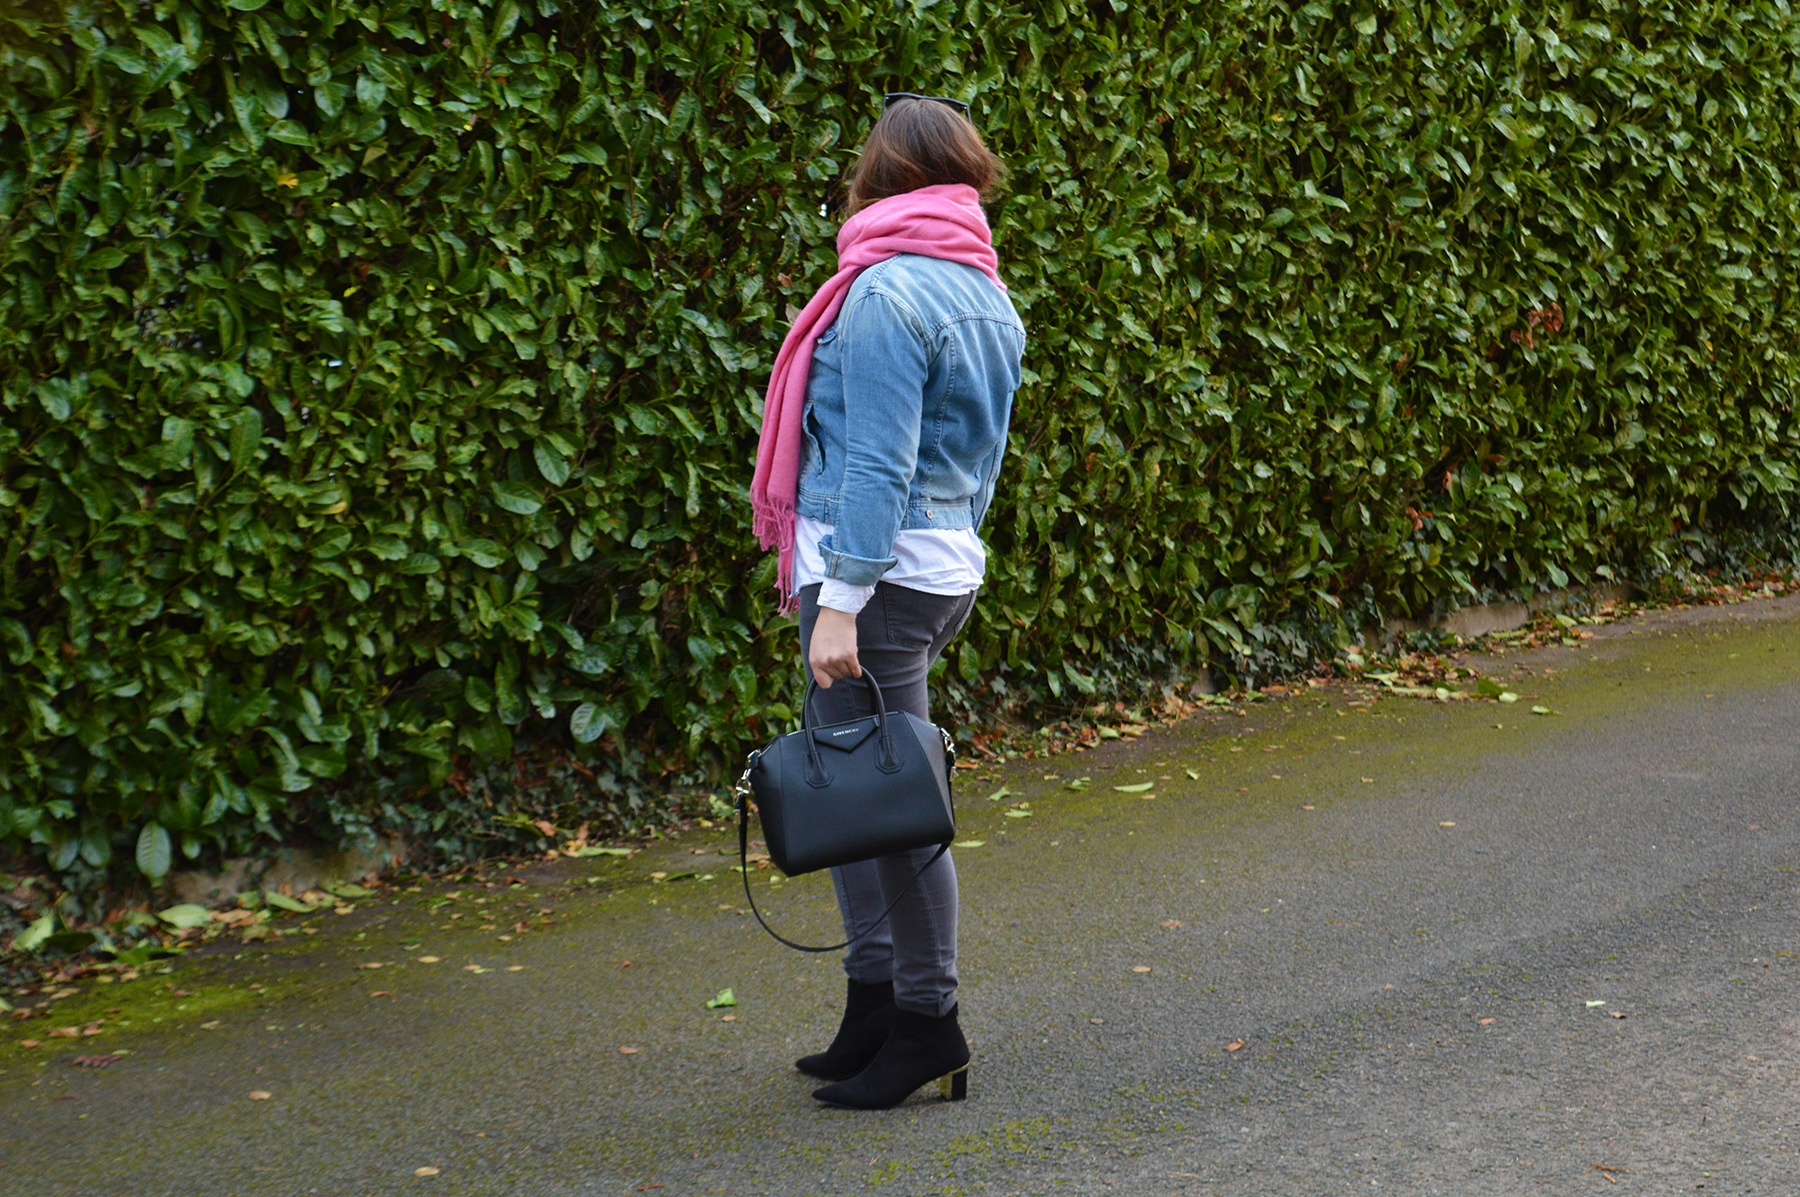 Accessorize with a pink scarf